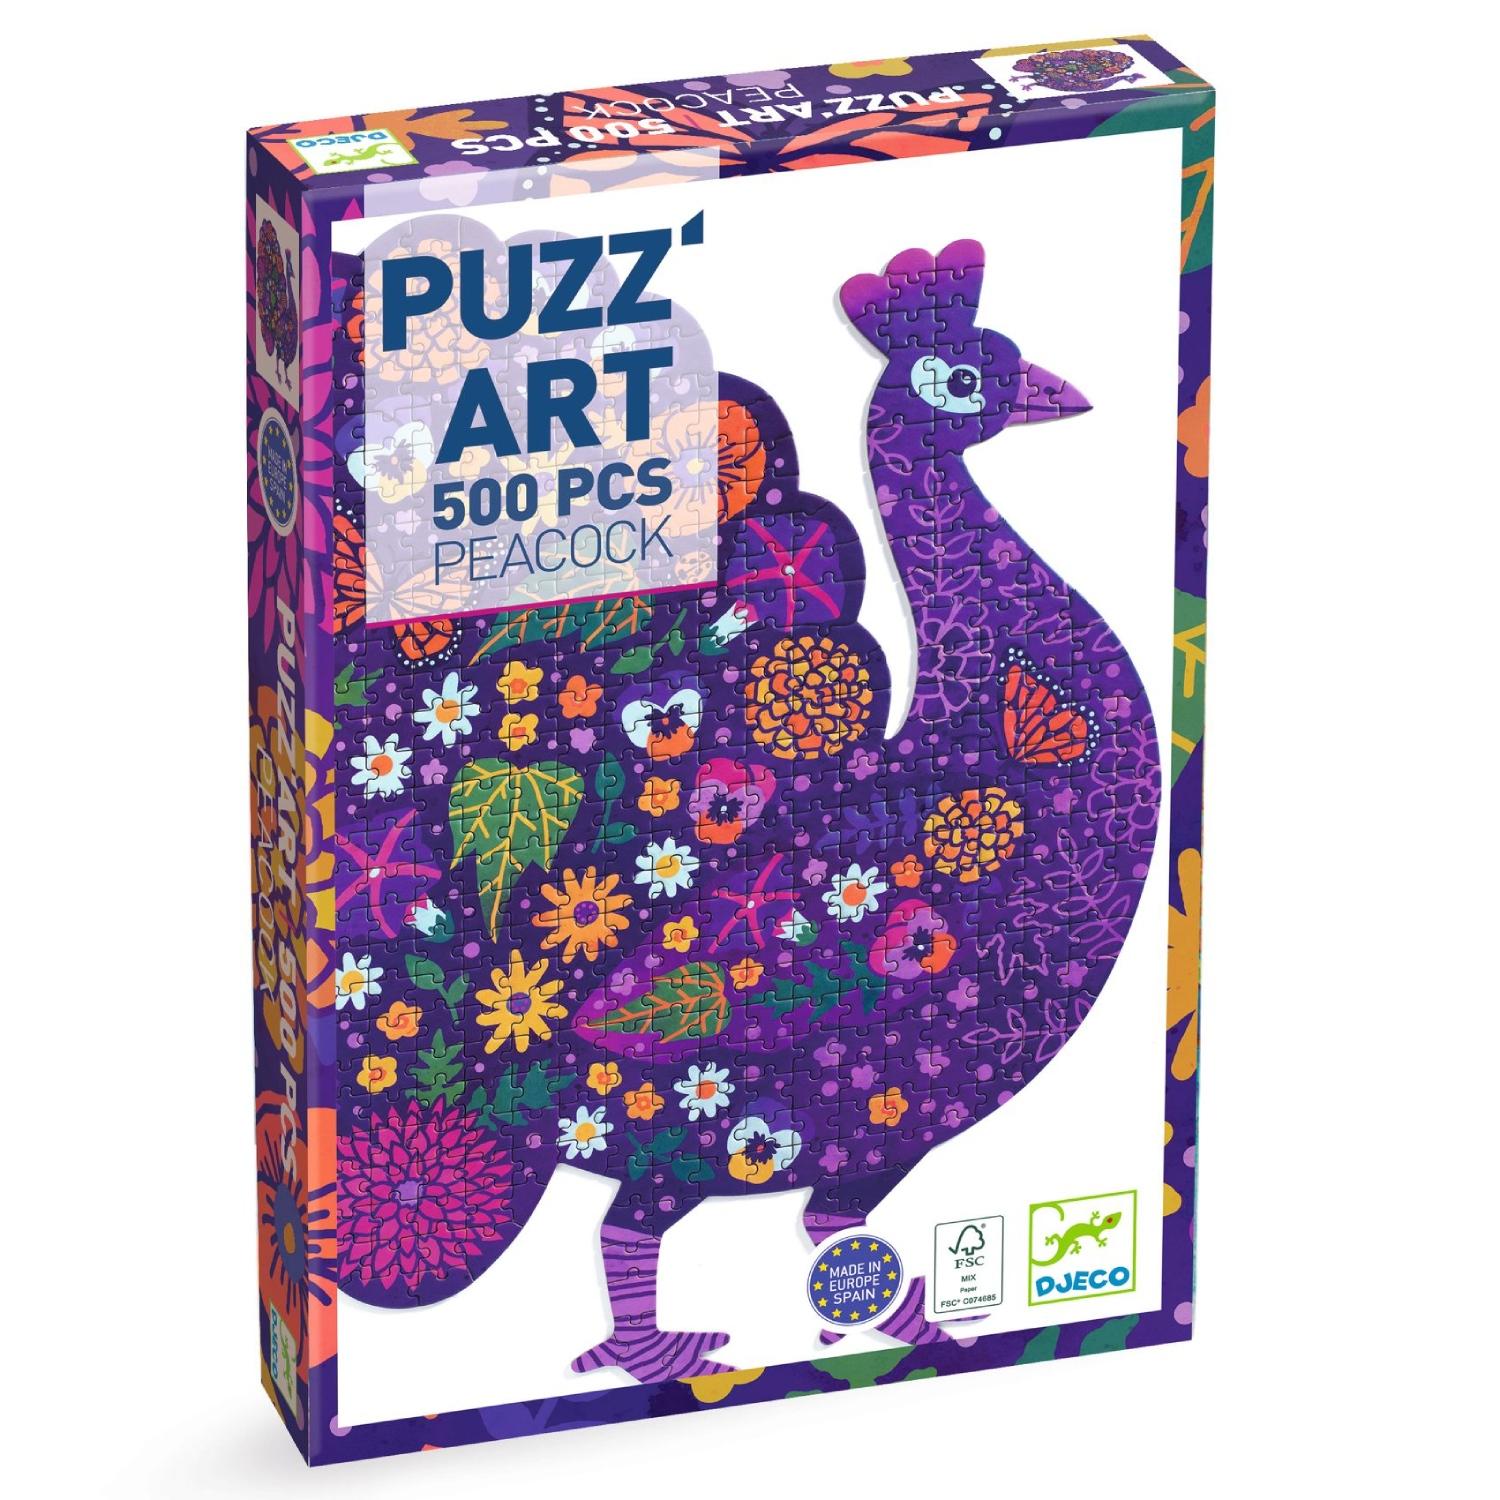 Puzz'art peacock 500 pieces by Djeco